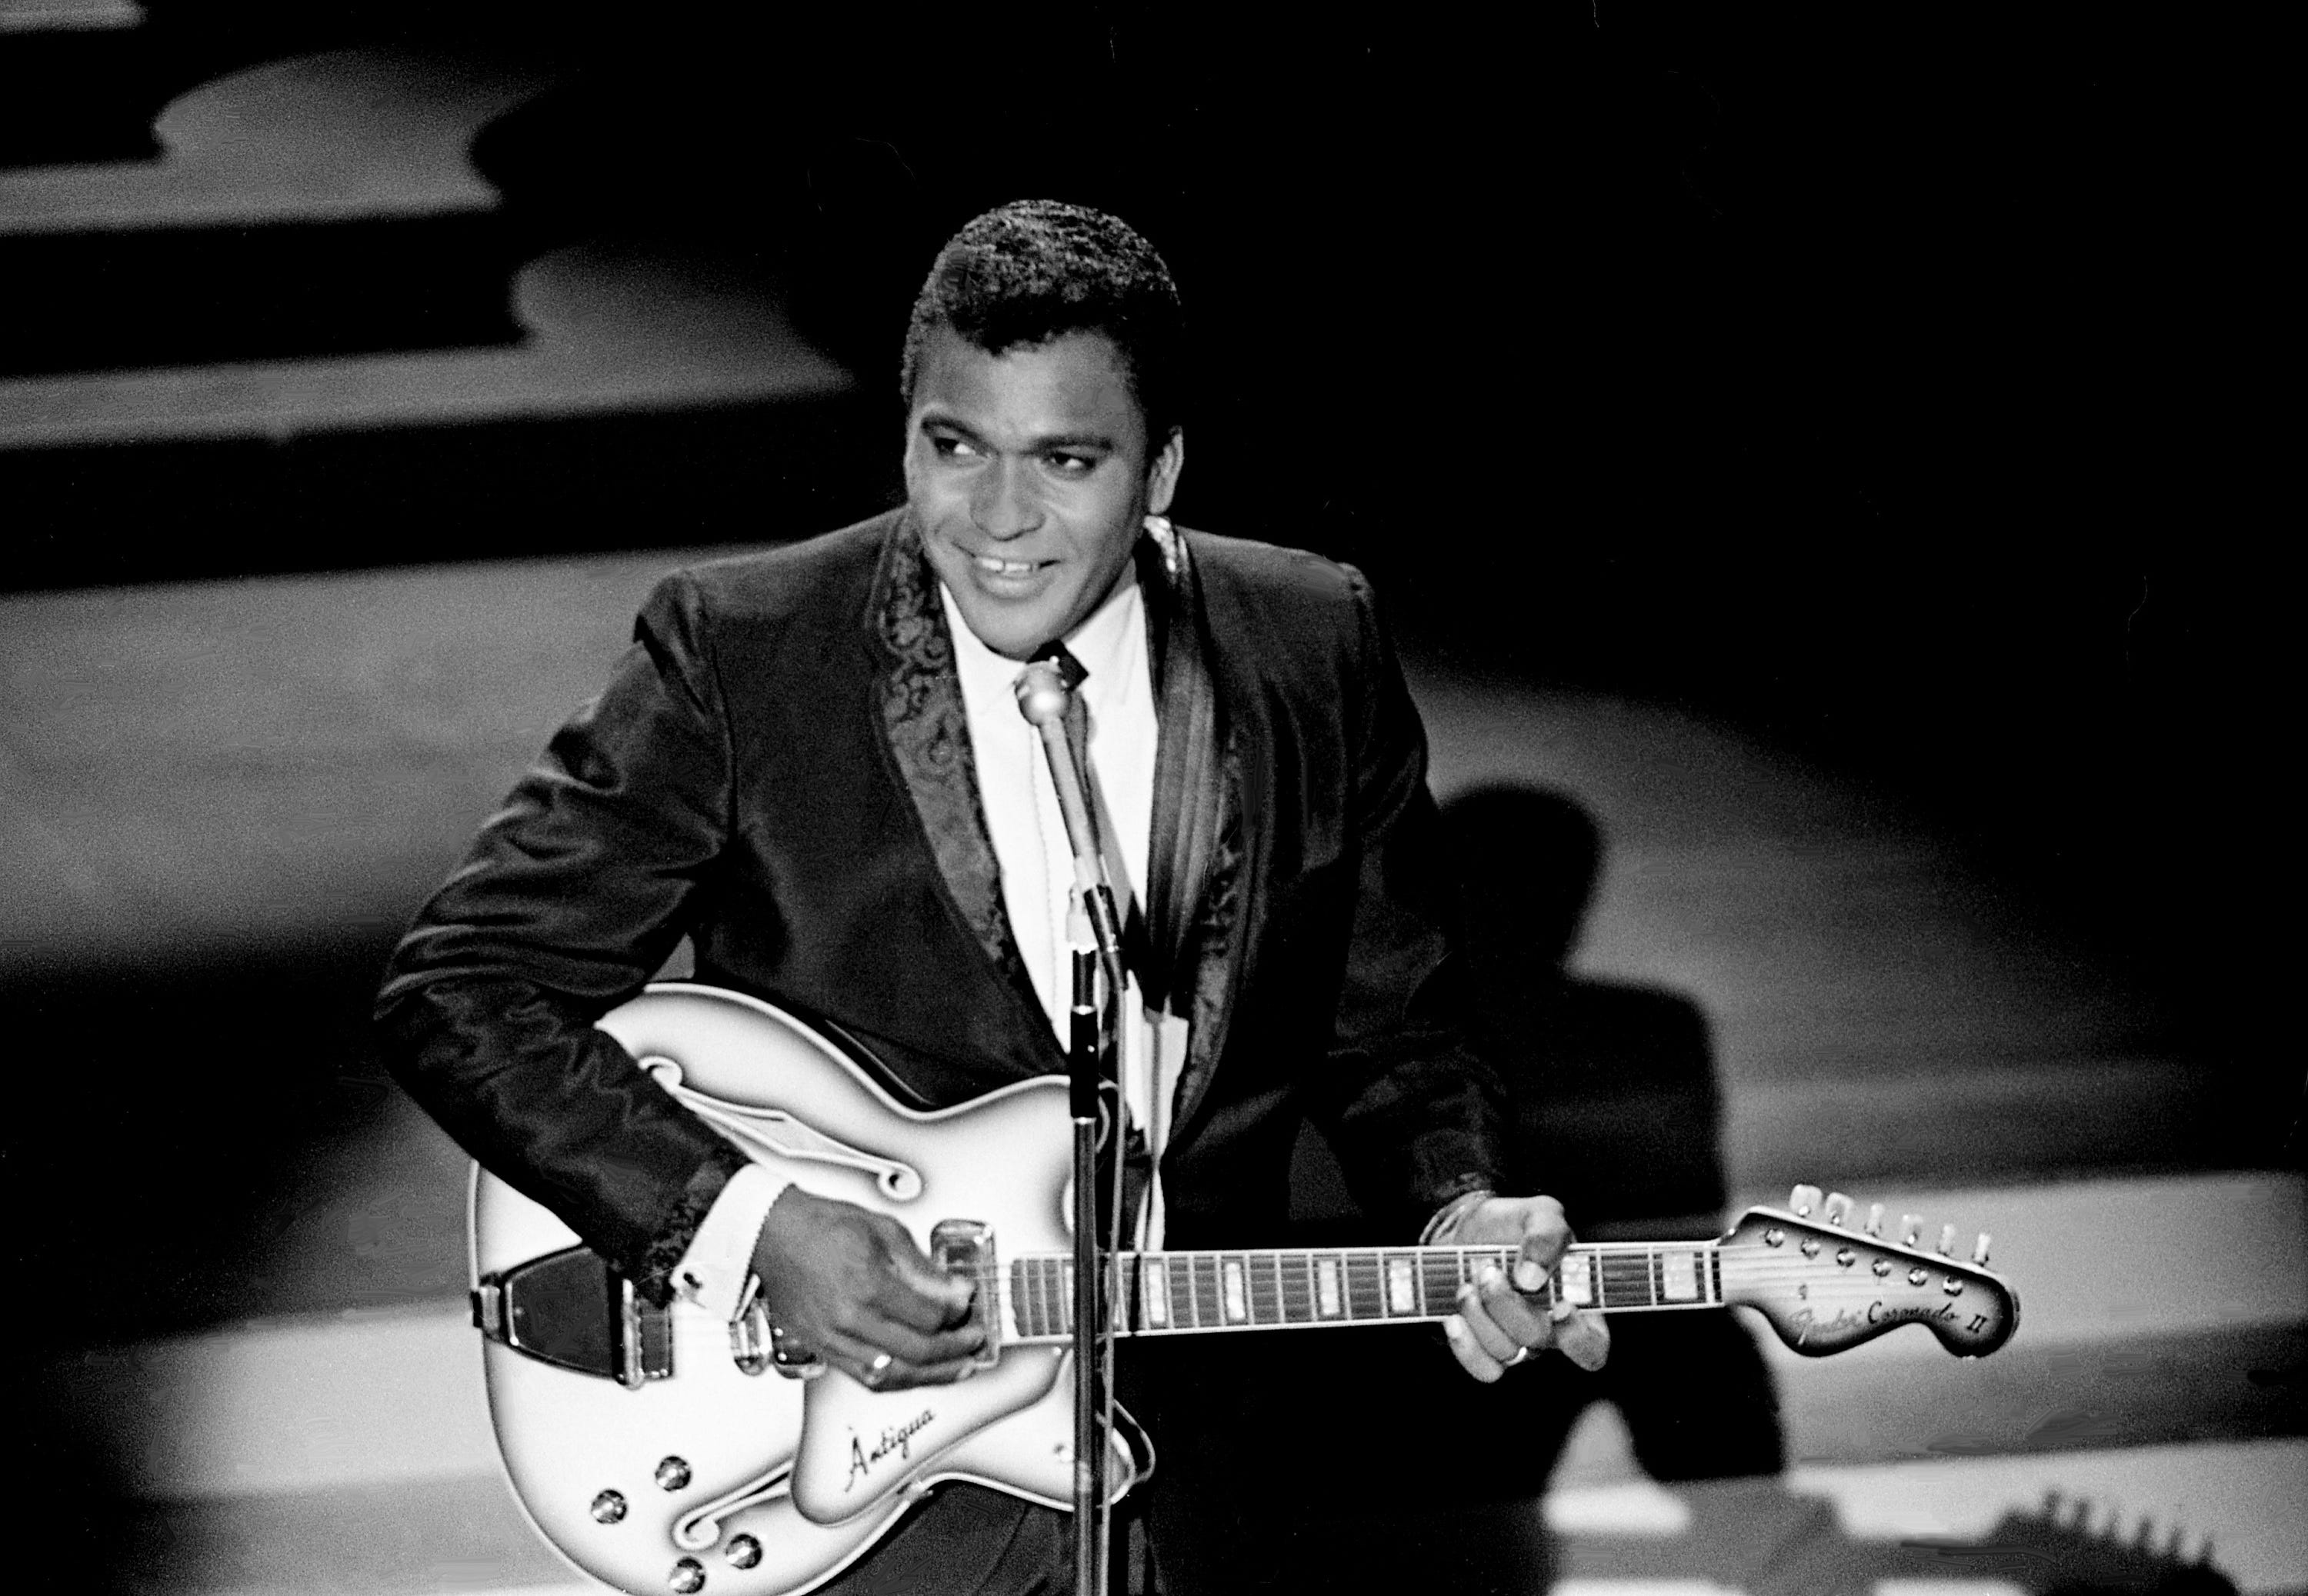 Charley Pride performs one of five songs nominated for Single of the Year at the third annual CMA Awards at the Ryman Auditorium on October 15, 1969.